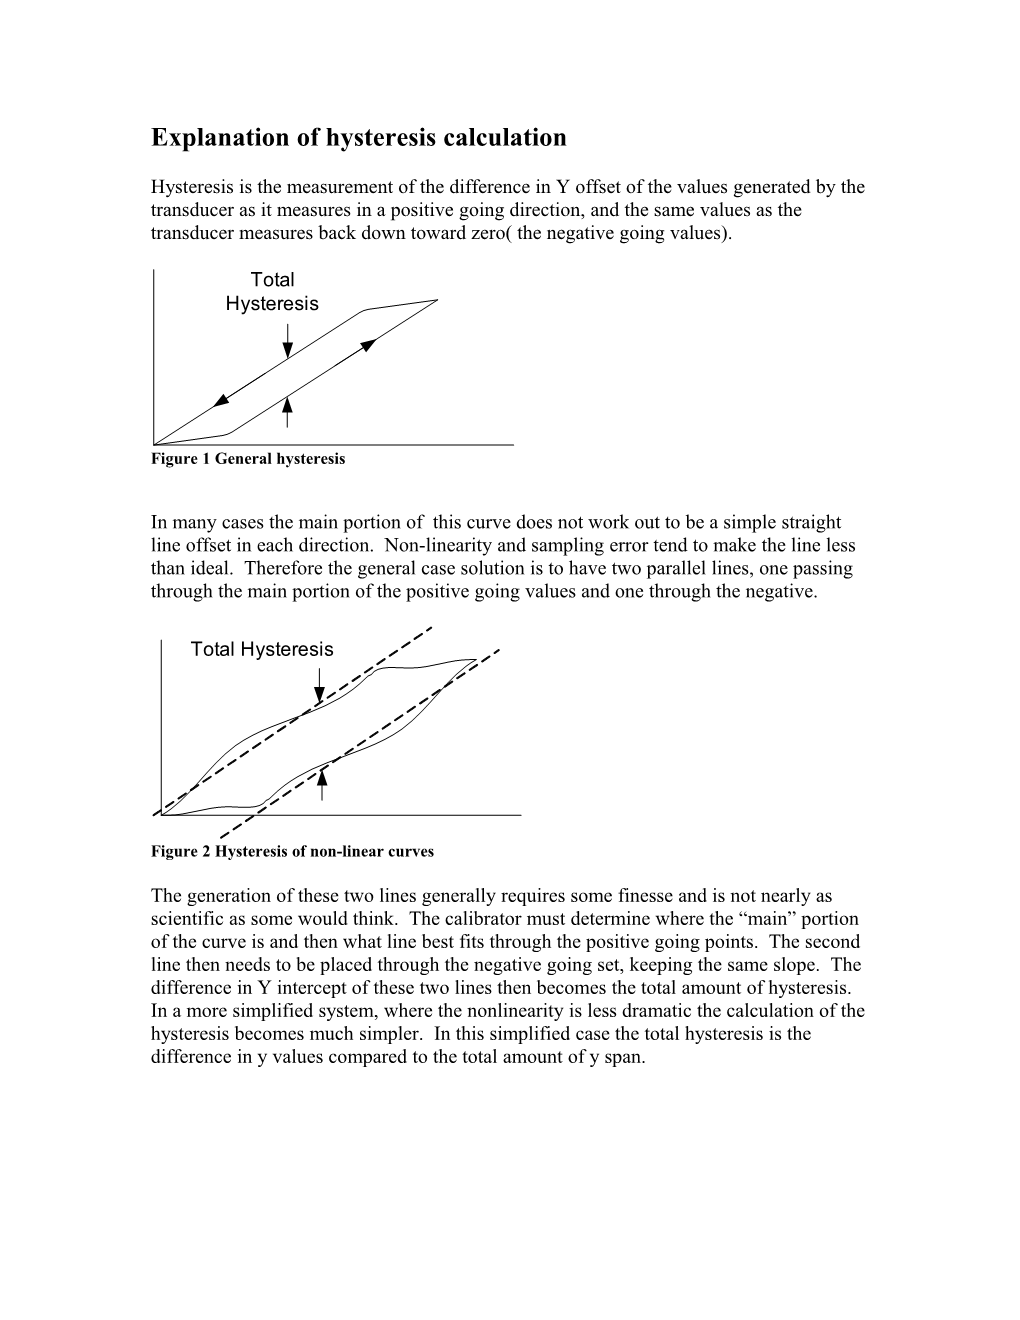 Explanation of Hysteresis Calculation